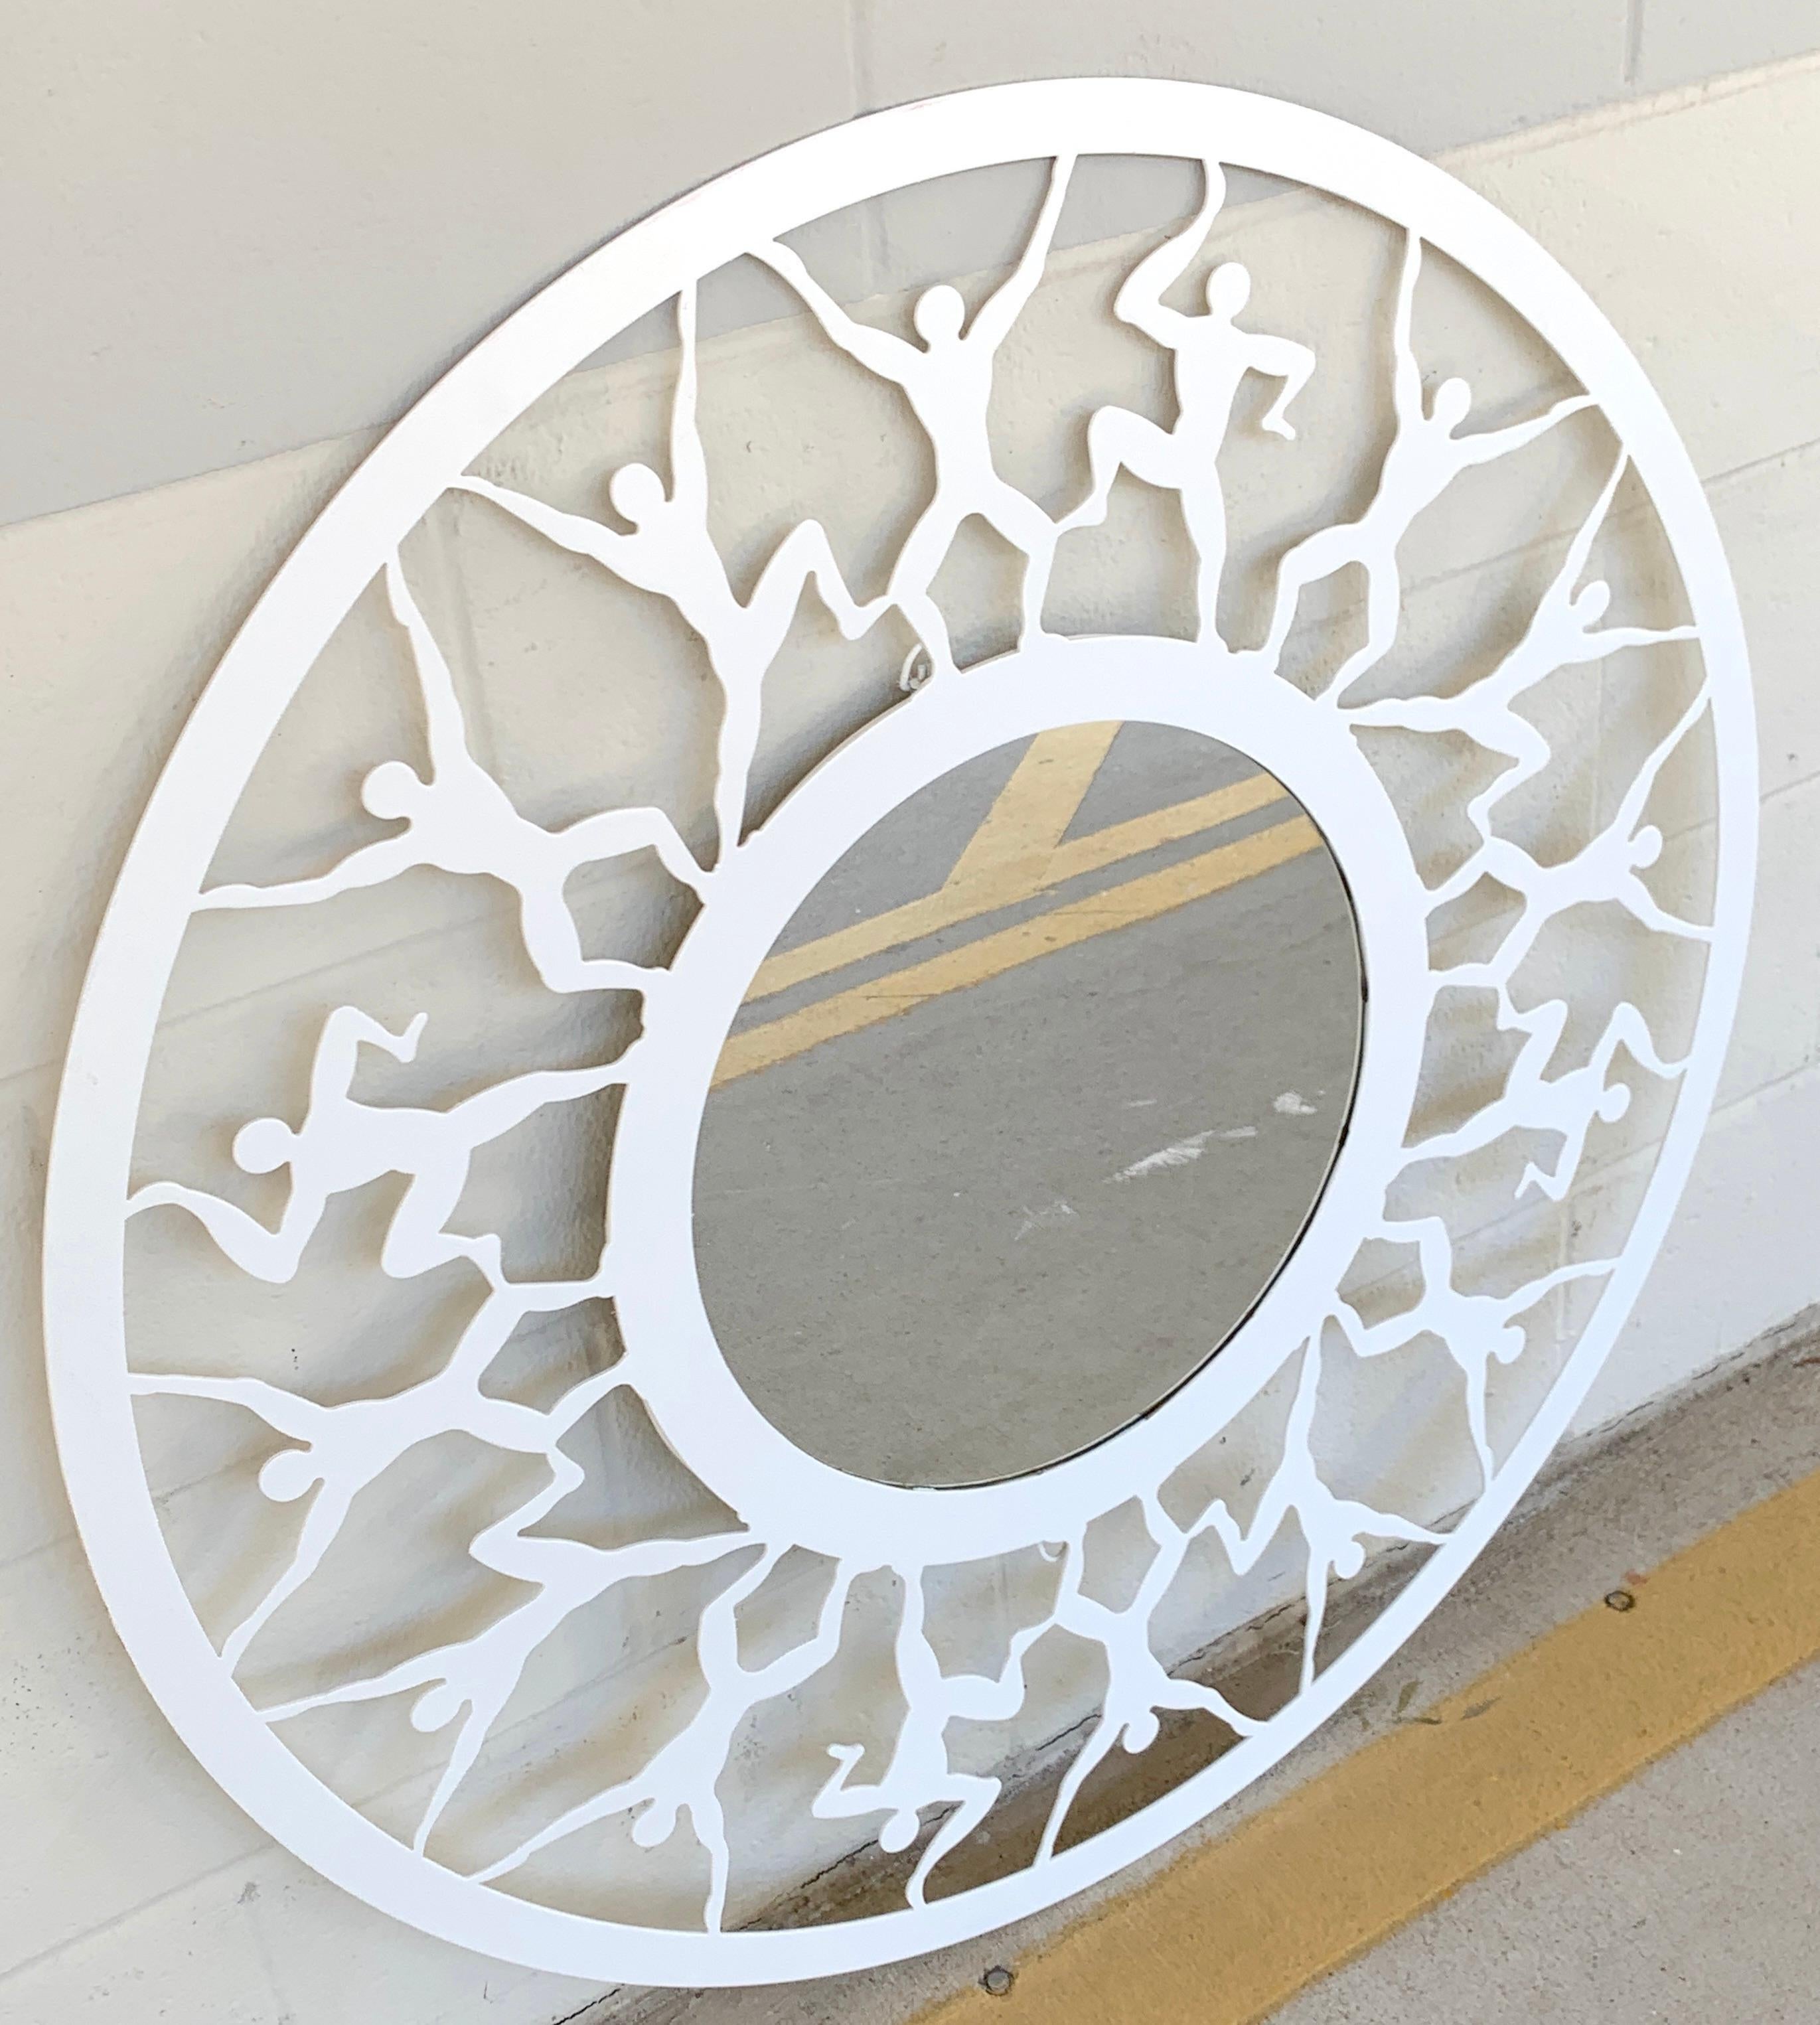 Modern circular white enameled 'Atlas' mirror, with 16 continuous figural supports, surrounding a 17.5 inch diameter inset mirror.